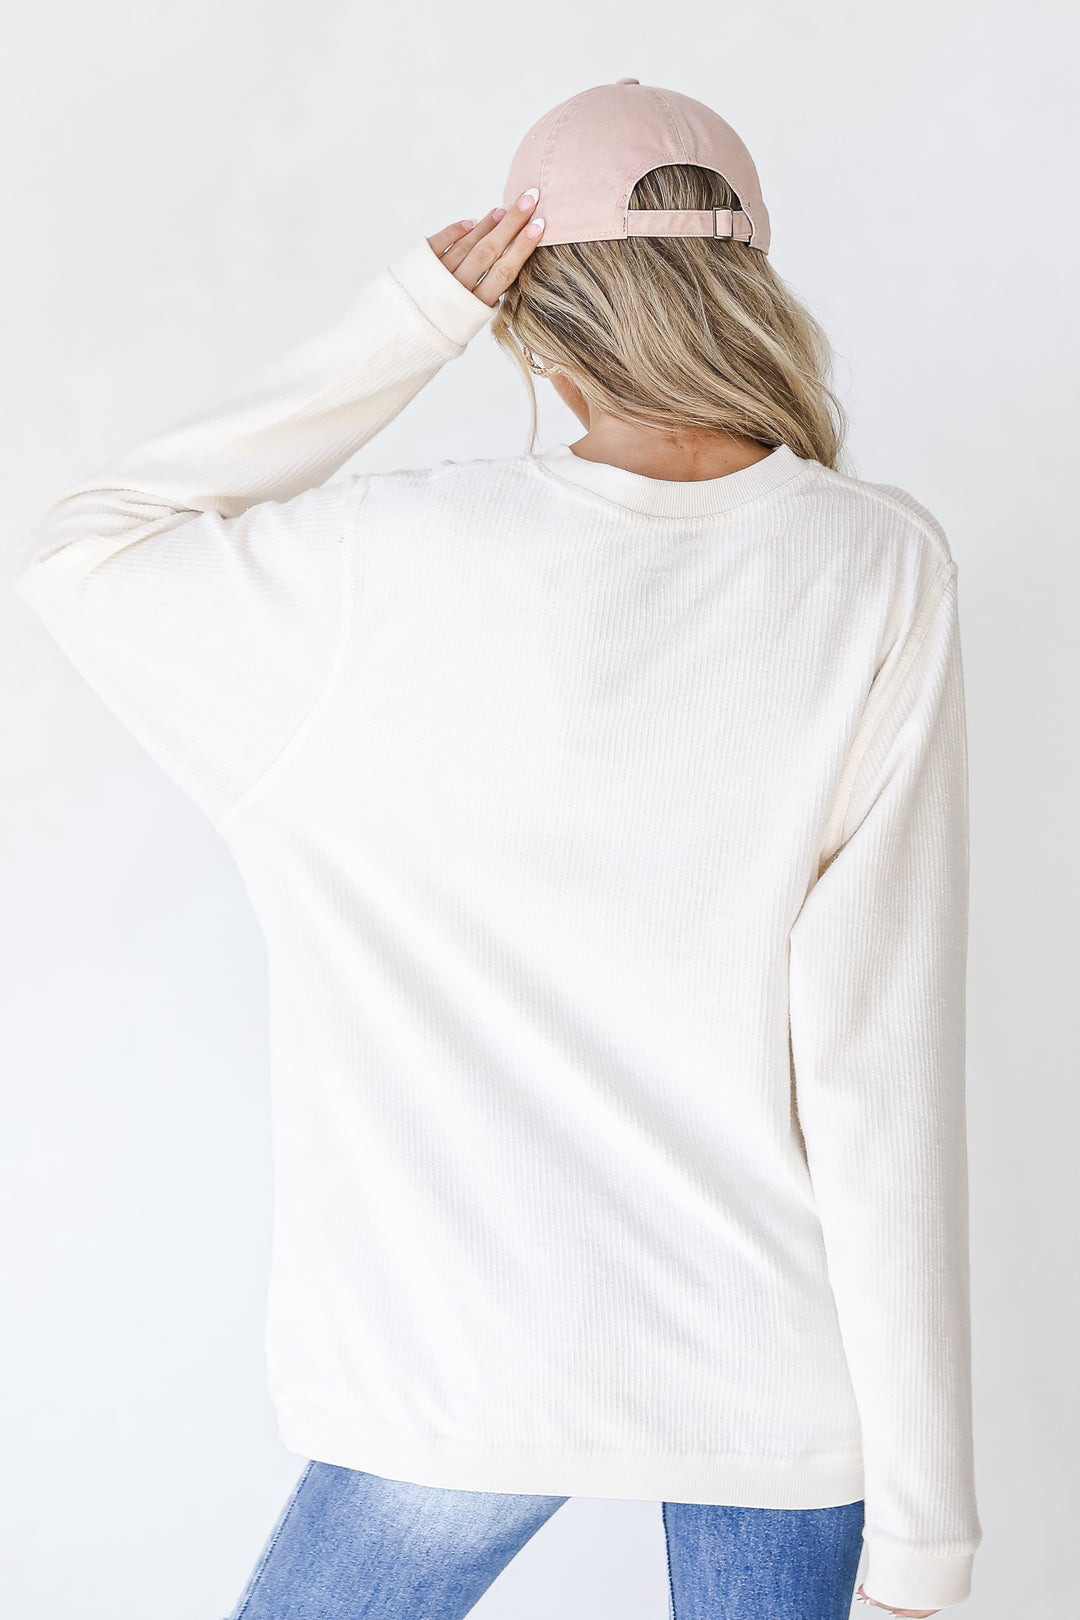 Charleston Corded Pullover back view